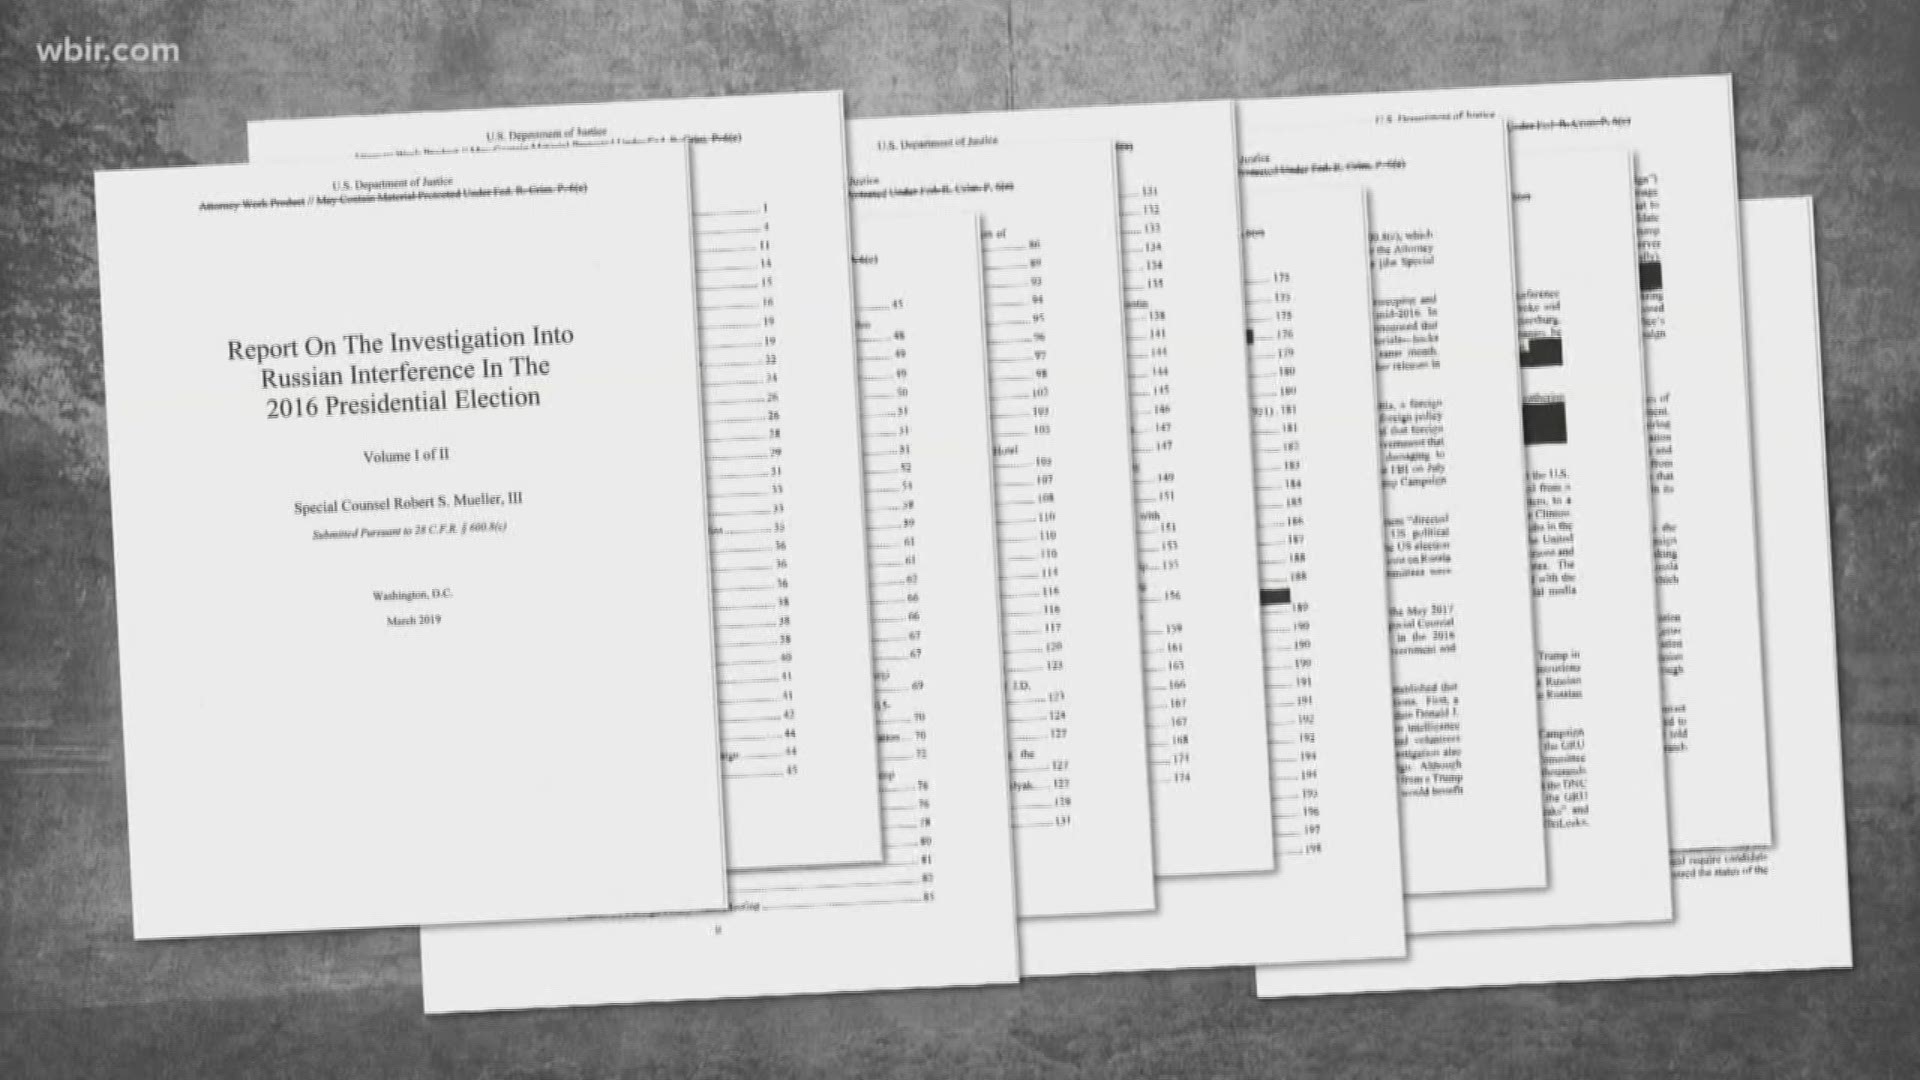 The 448-page document compiles almost two full years of the investigation into Russian meddling in American politics.